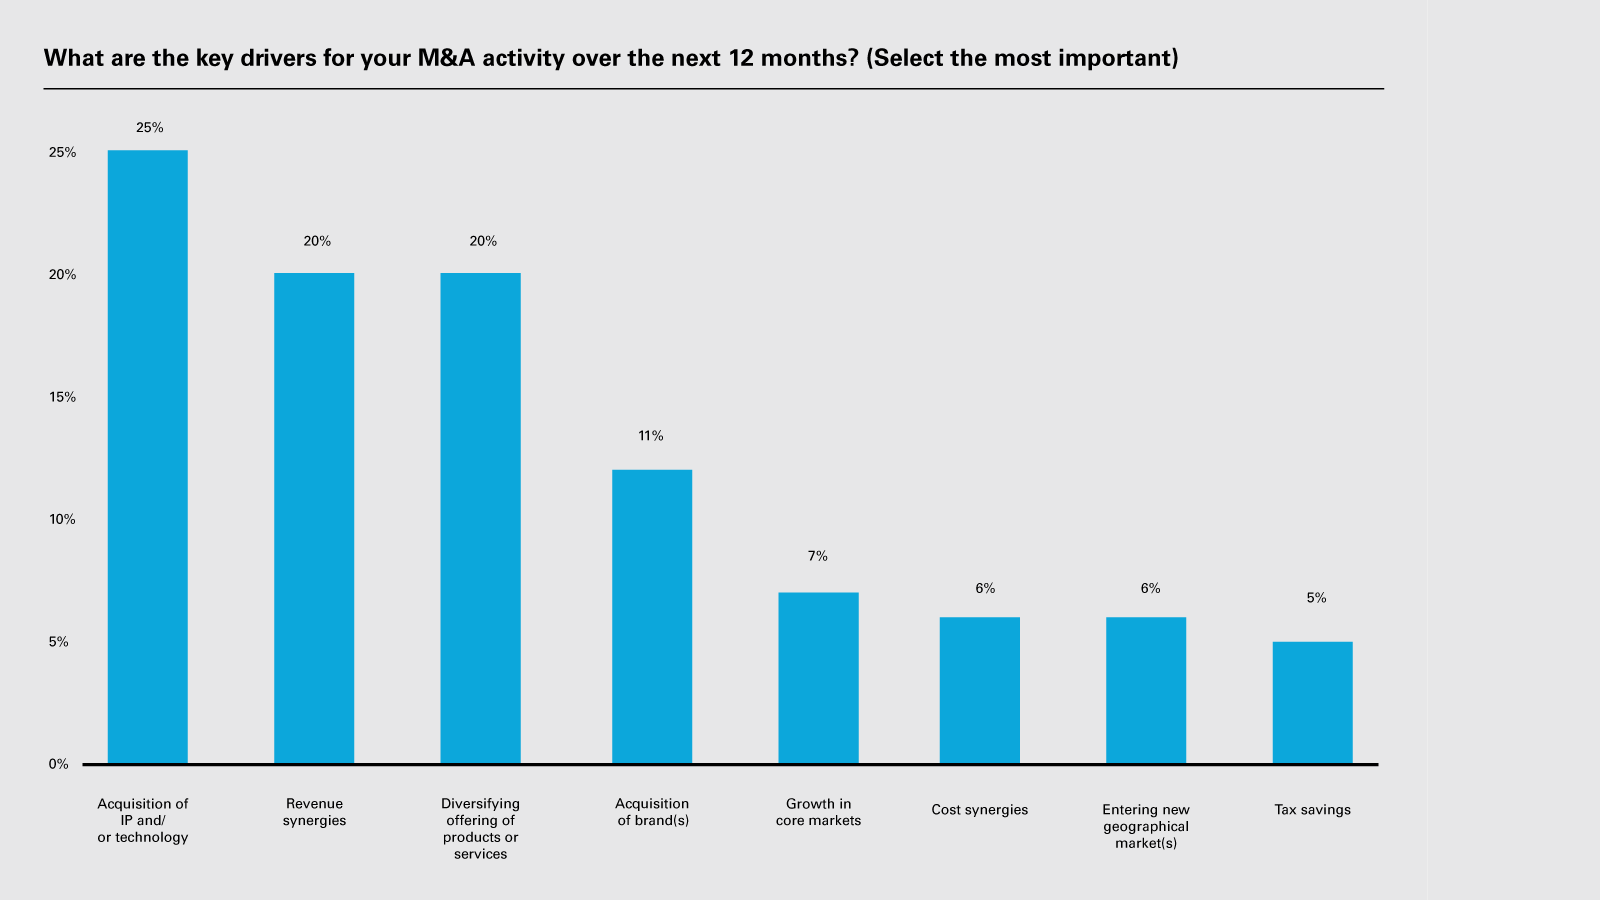 M&A activity over the next 12 months